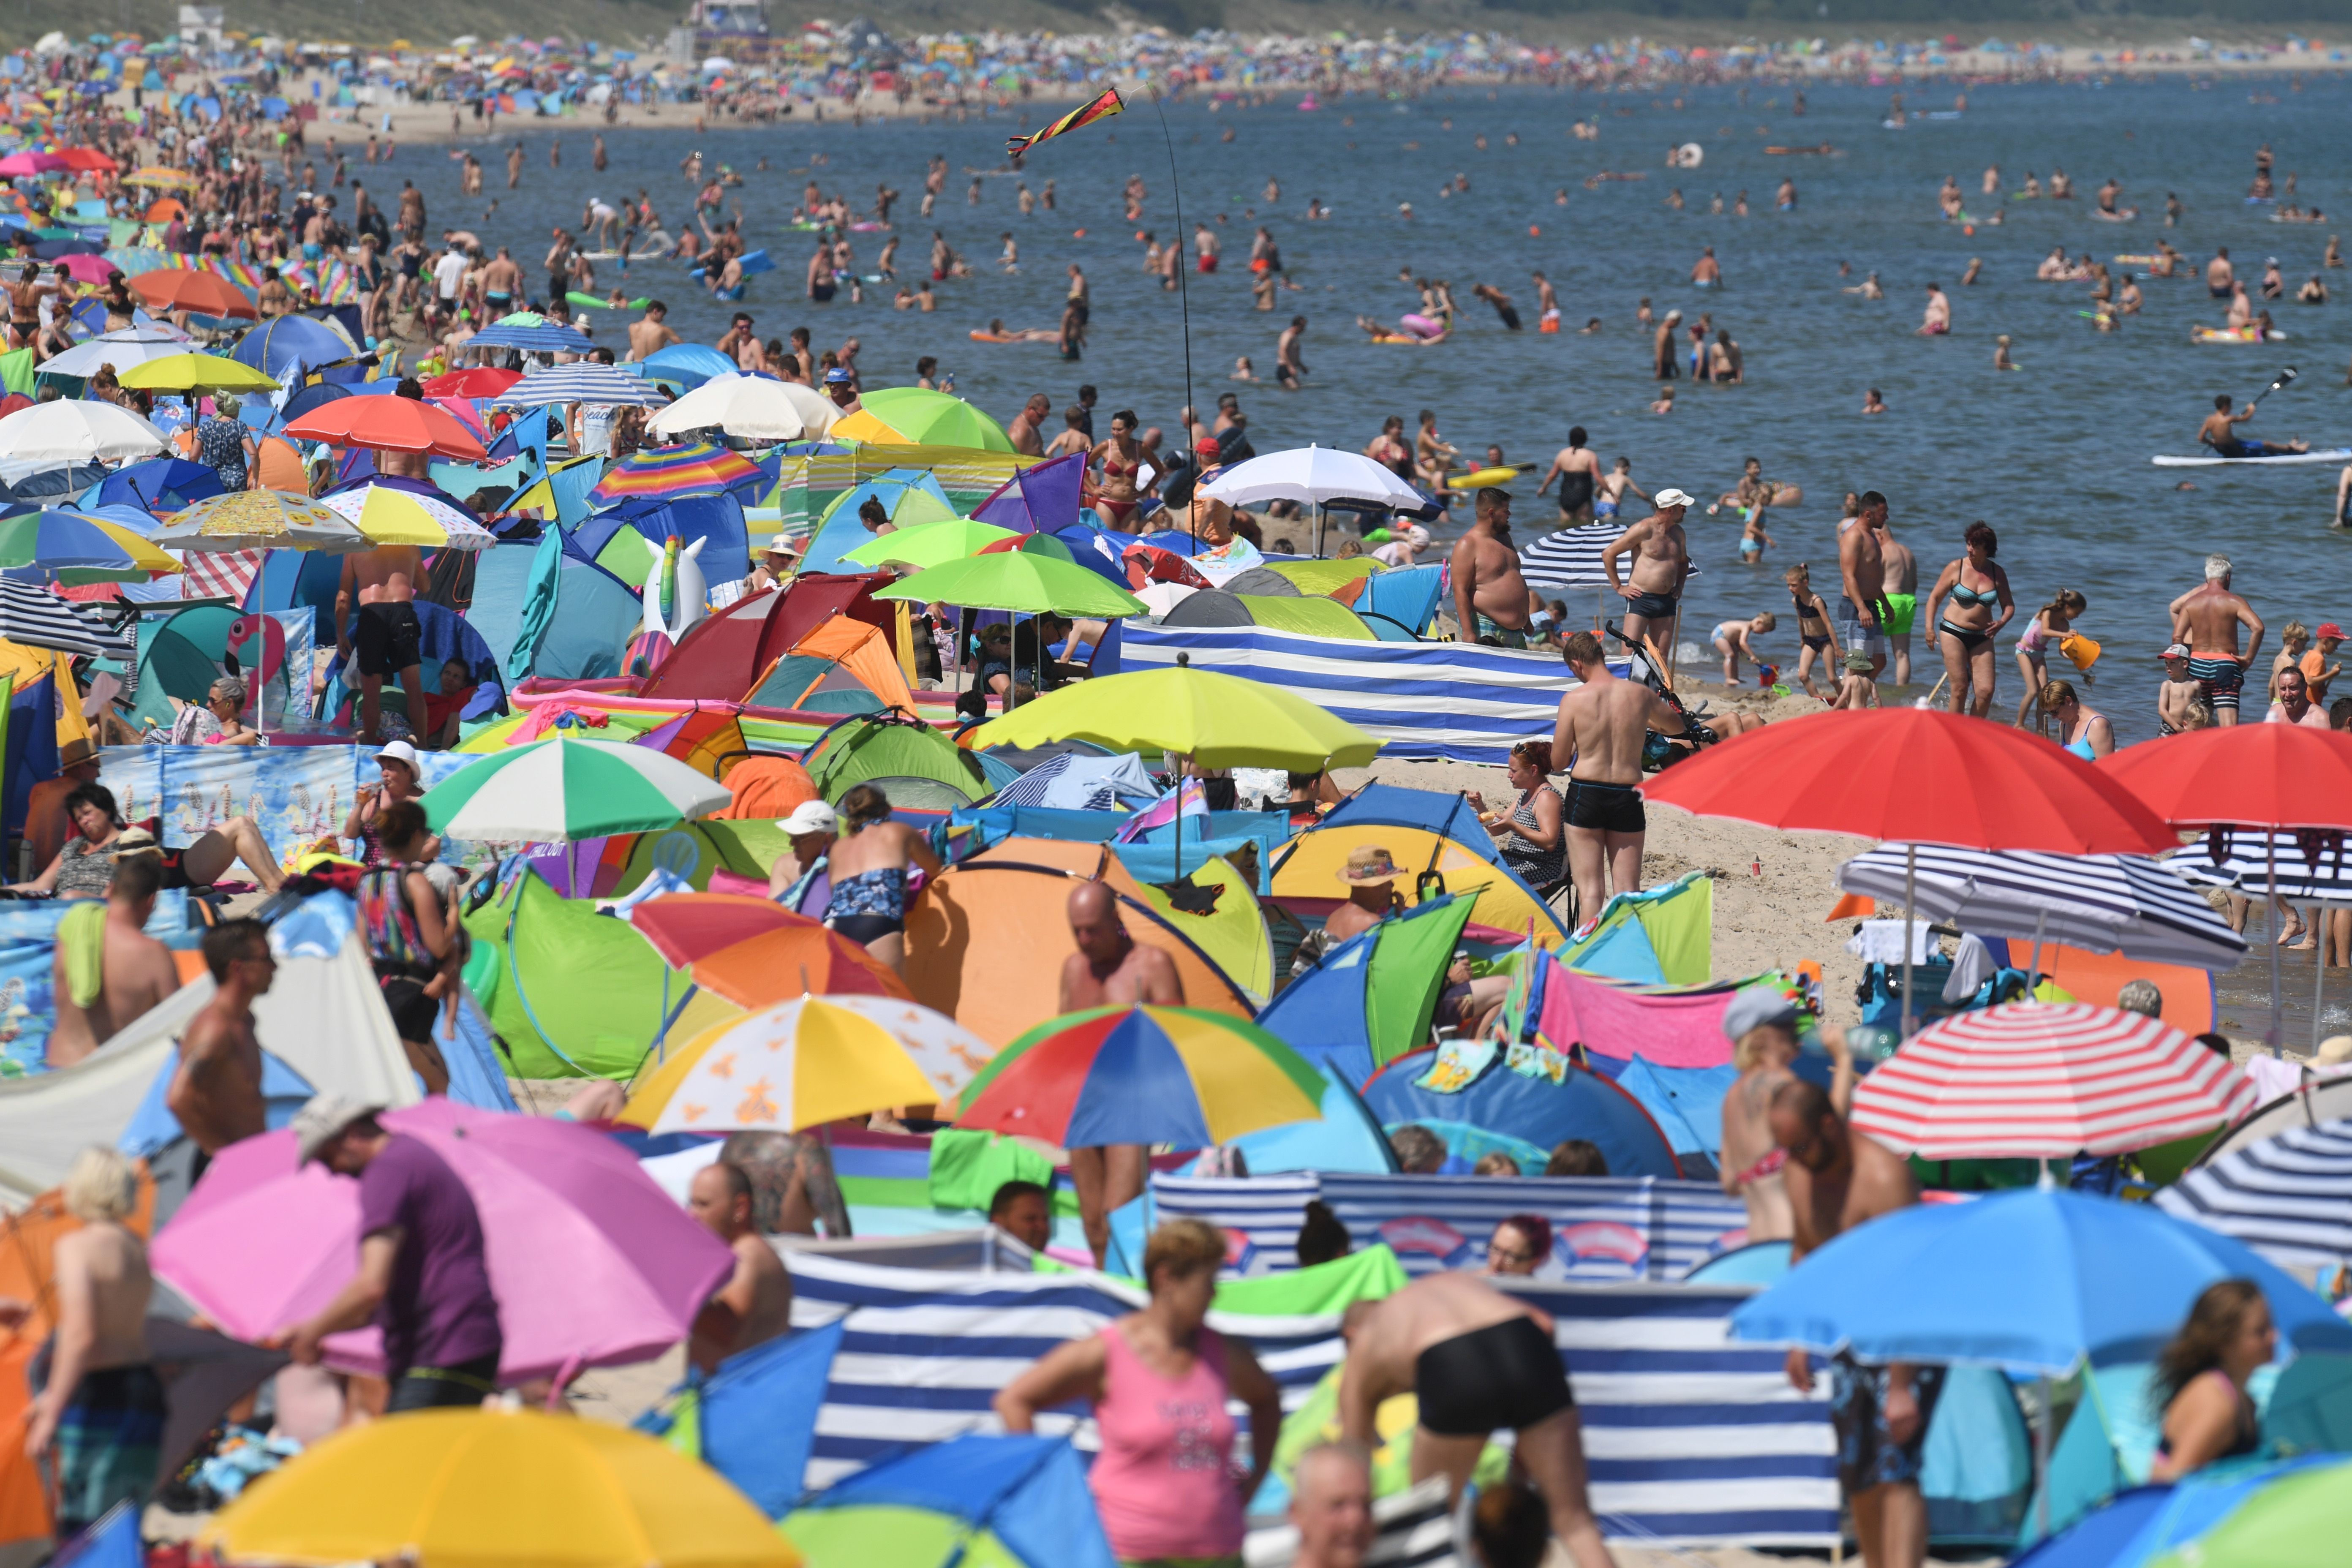 People crowd the beach at Zinnowitz on the island of Usedom in the Baltic Sea, northern Germany.